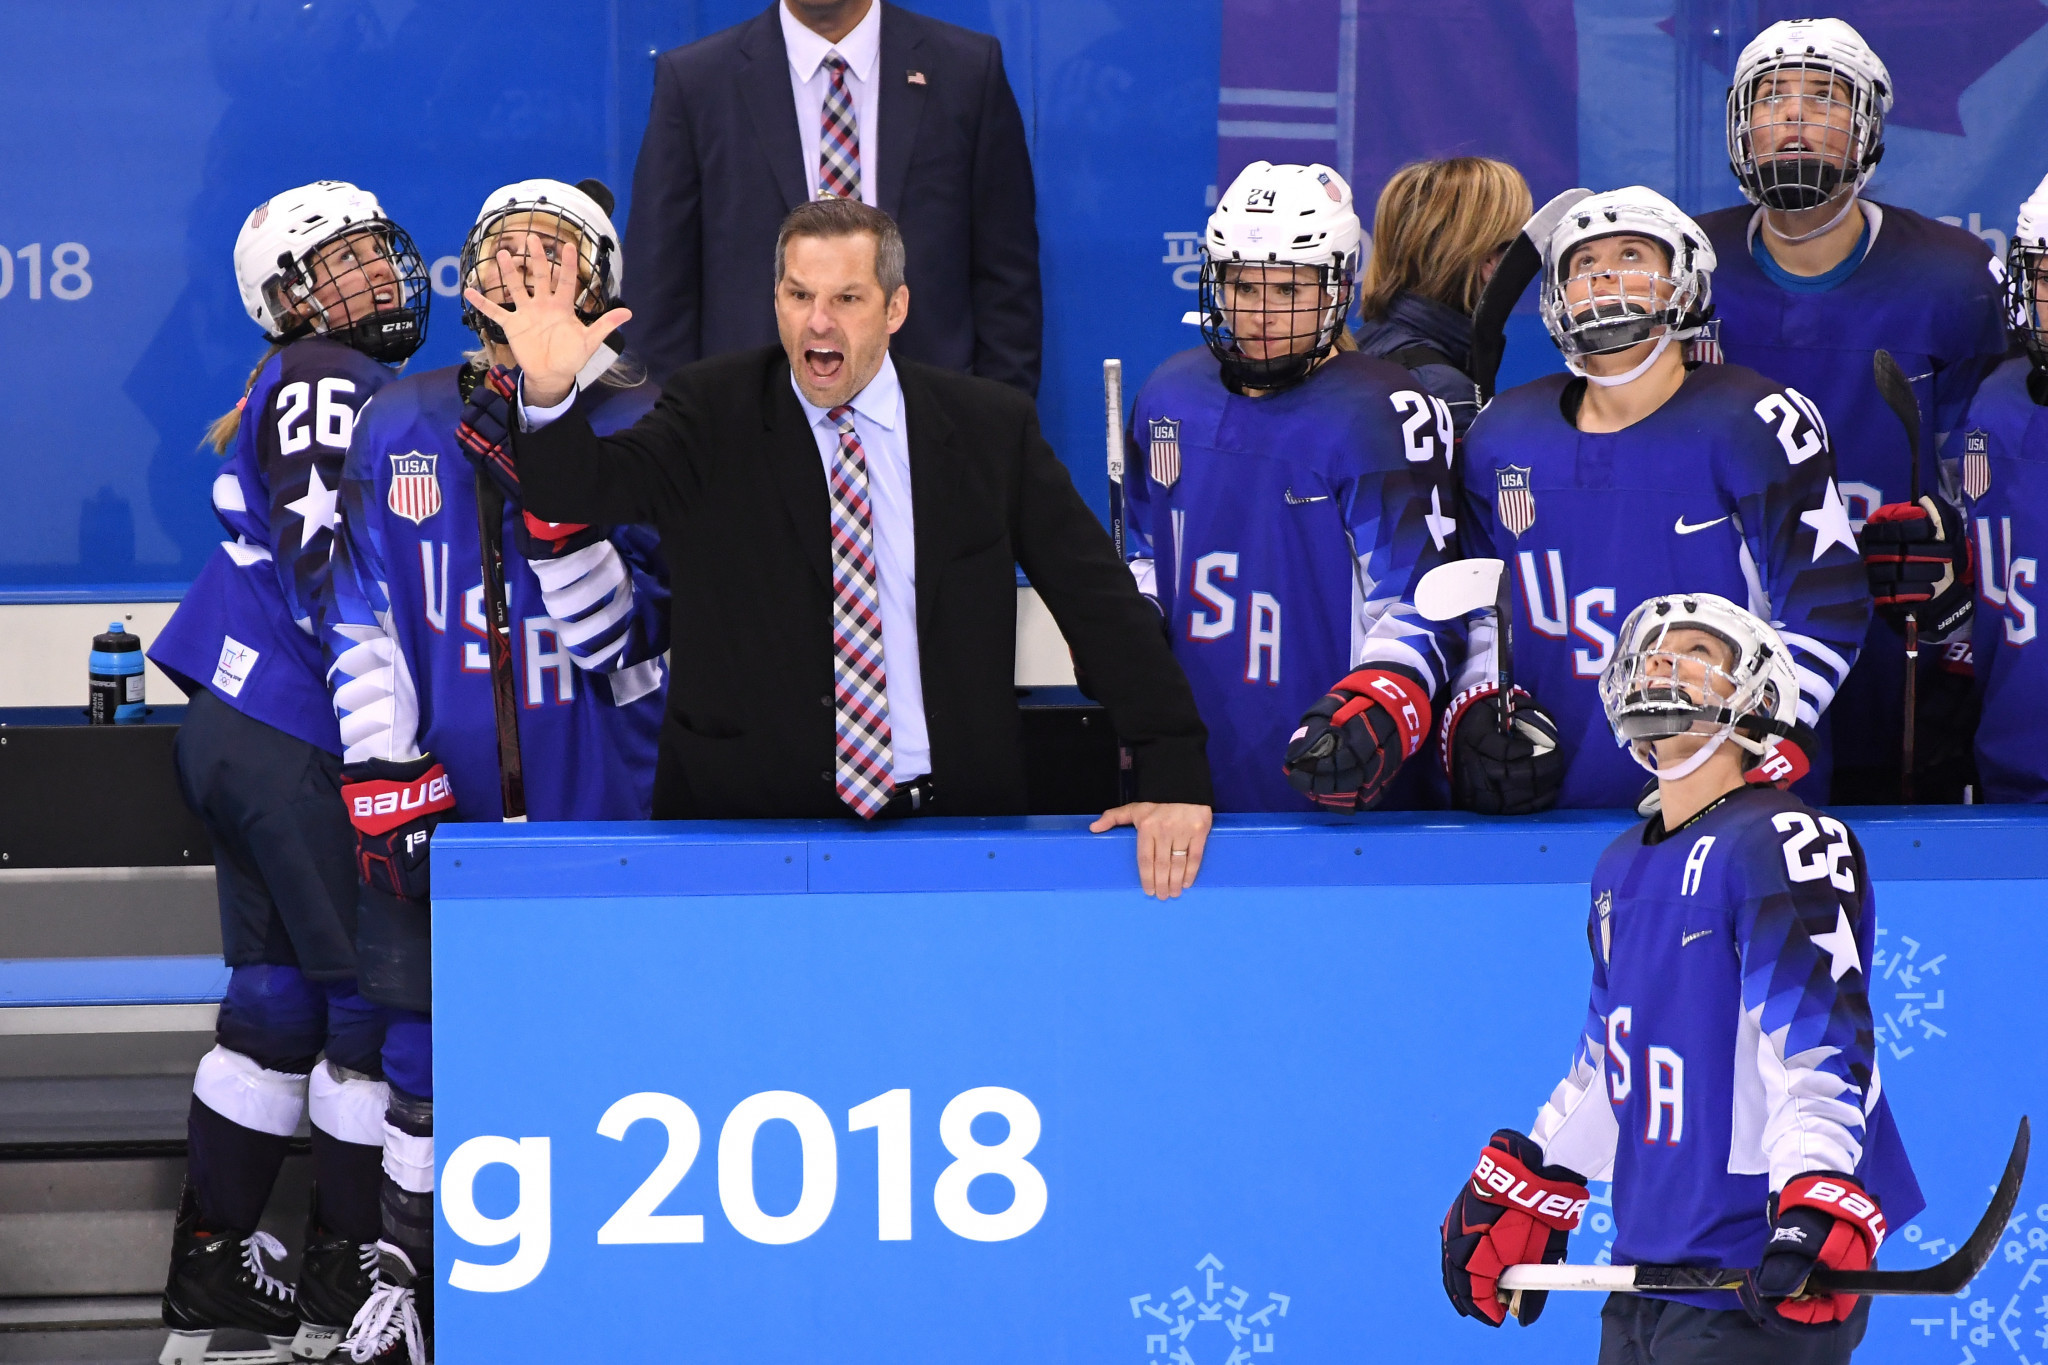 Robb Stauber guided the United States' women's ice hockey team to the Olympic gold medal at Pyeongchang 2018 ©Getty Images